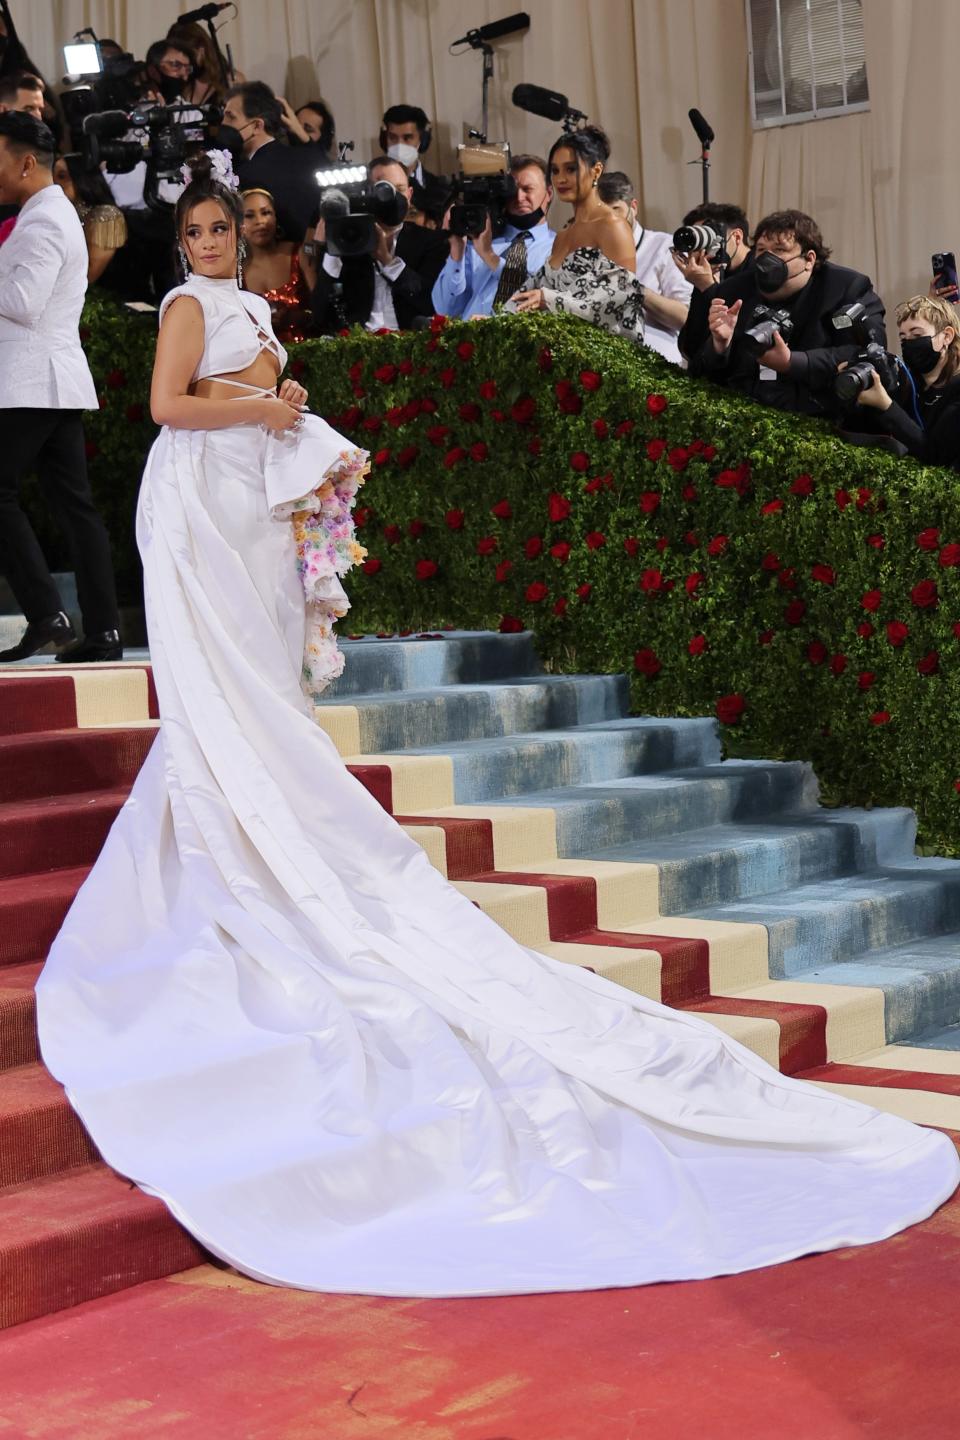 Camila on the red carpet steps with a long white skirt train flowing down them. The front of the skirt has a large ruffle with pastel-colored flowers within the ruffle. She has a crop top that reveals her bare torso and sternum below her chest with white straps wrapped around her stomach. She has her hair up in a bun.